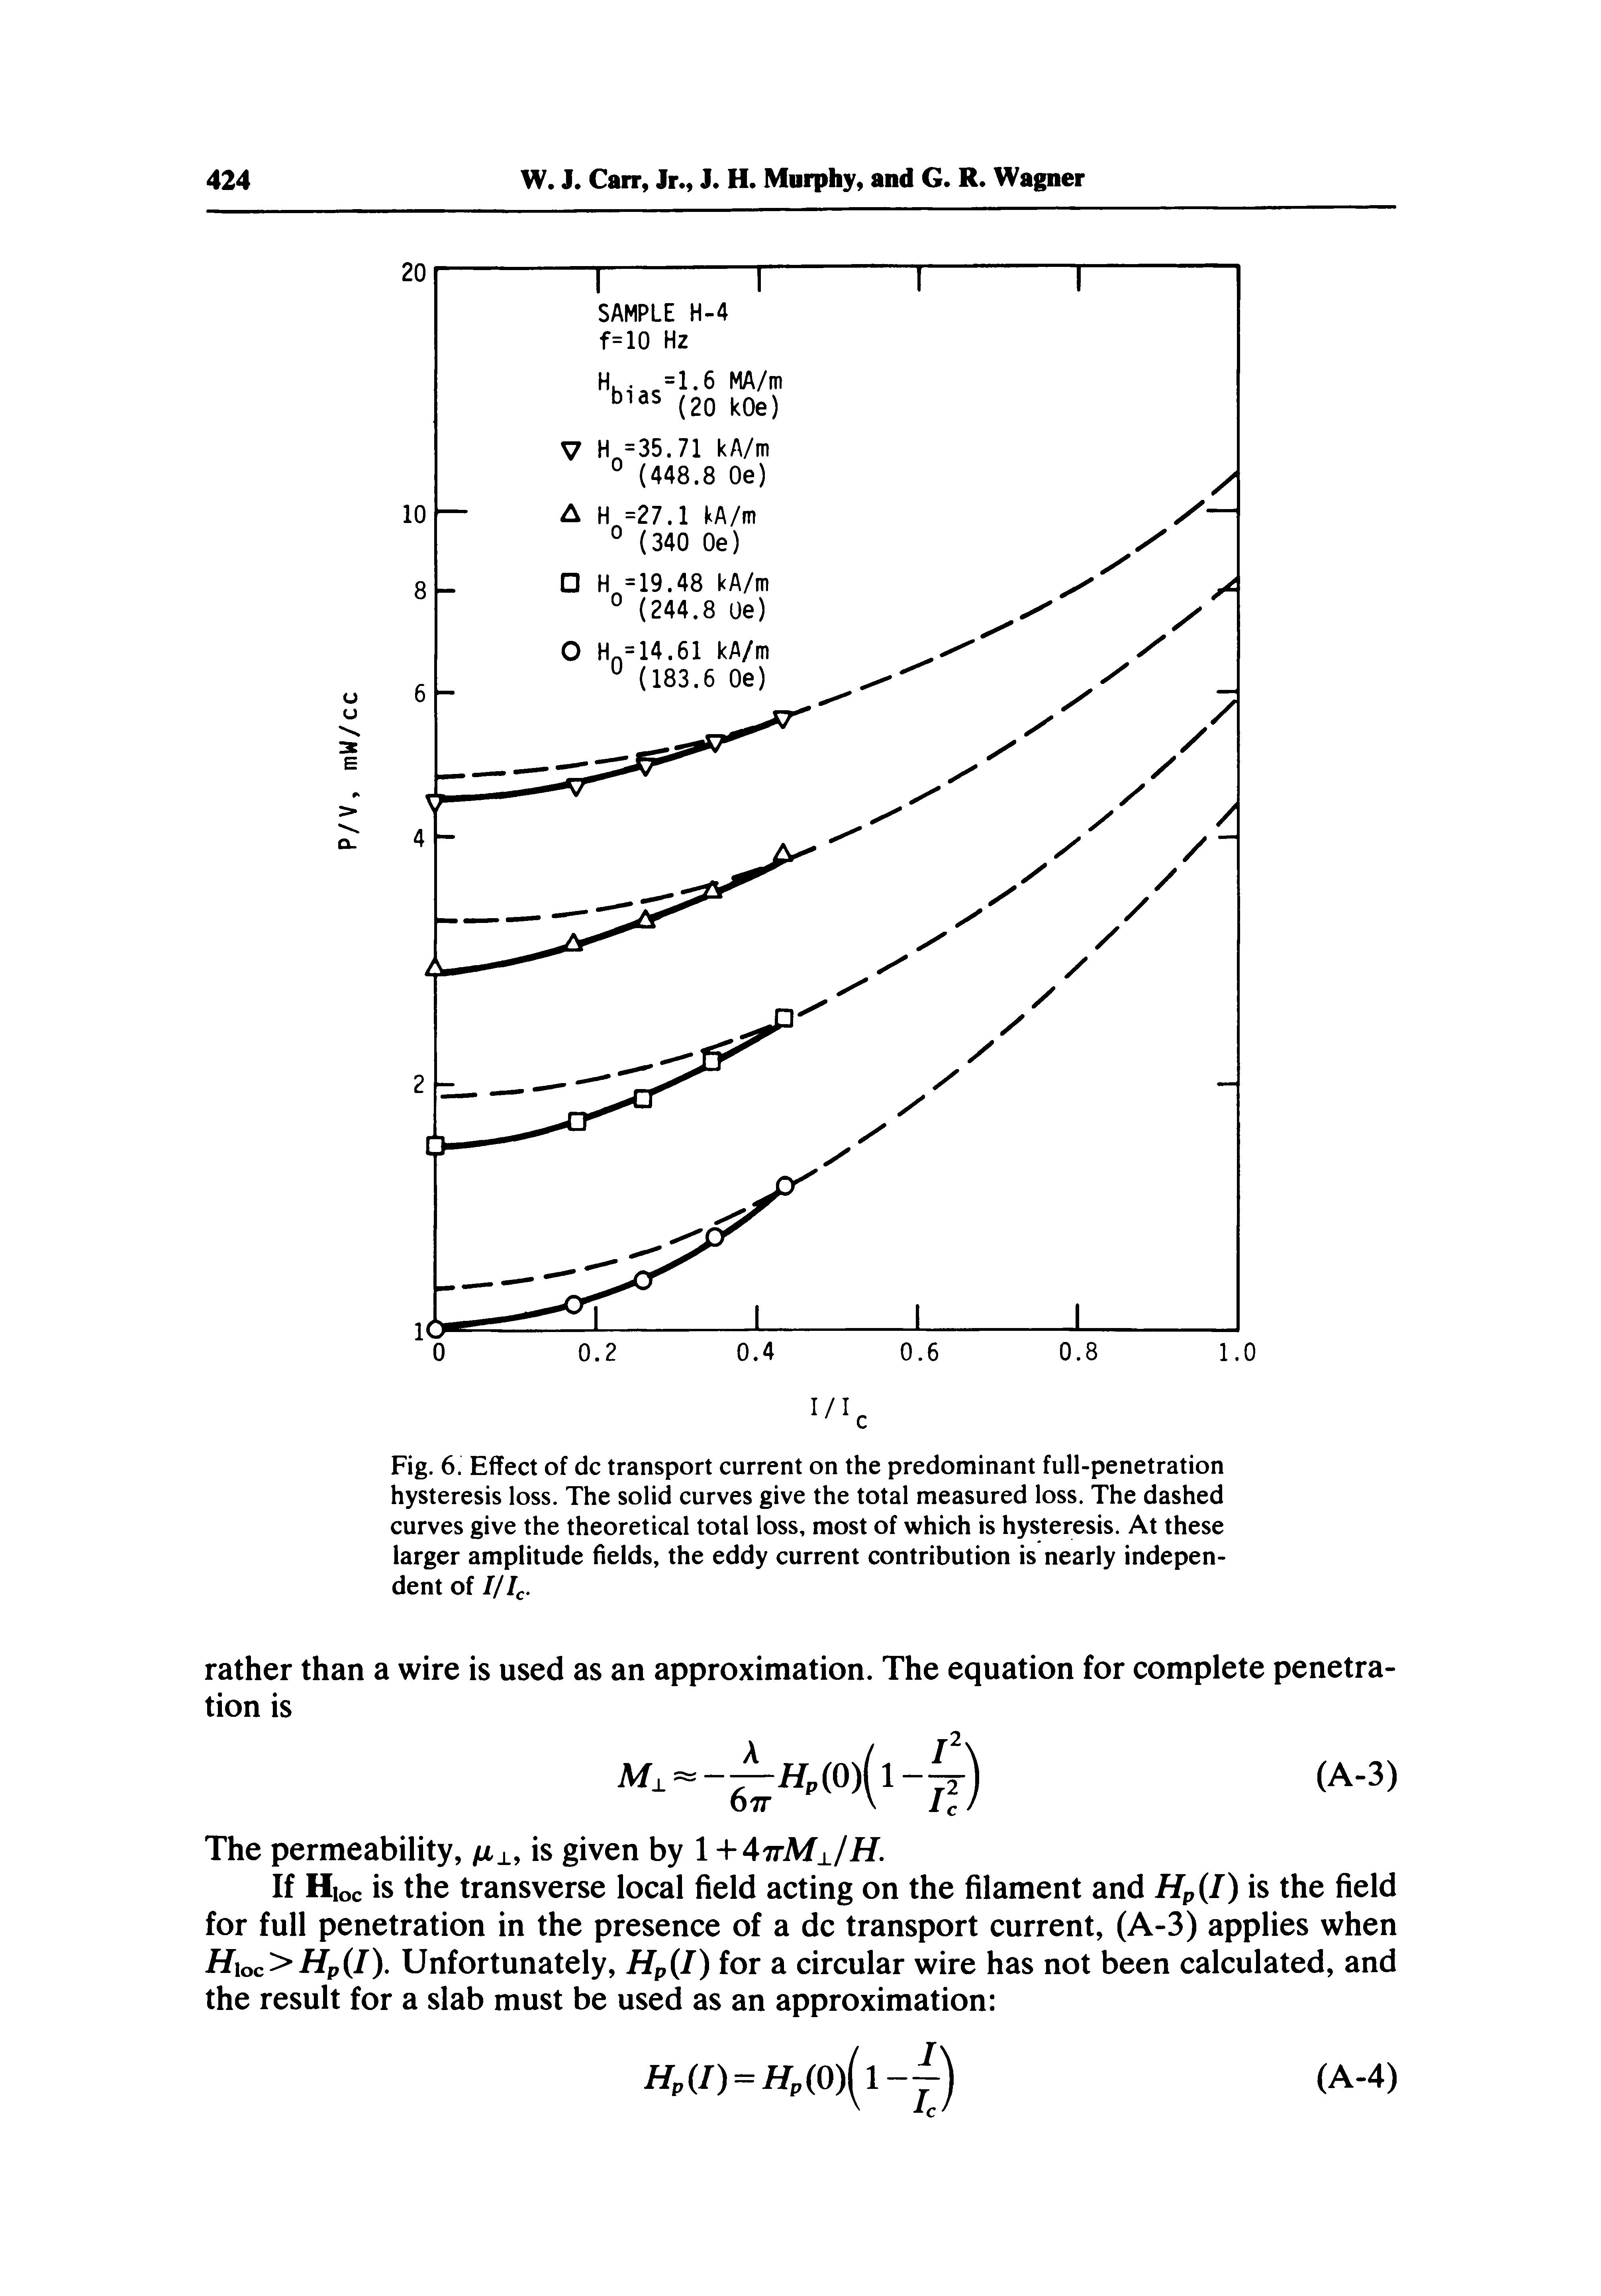 Fig. 6. Effect of dc transport current on the predominant full-penetration hysteresis loss. The solid curves give the total measured loss. The dashed curves give the theoretical total loss, most of which is hysteresis. At these larger amplitude fields, the eddy current contribution is nearly independent of ///<..